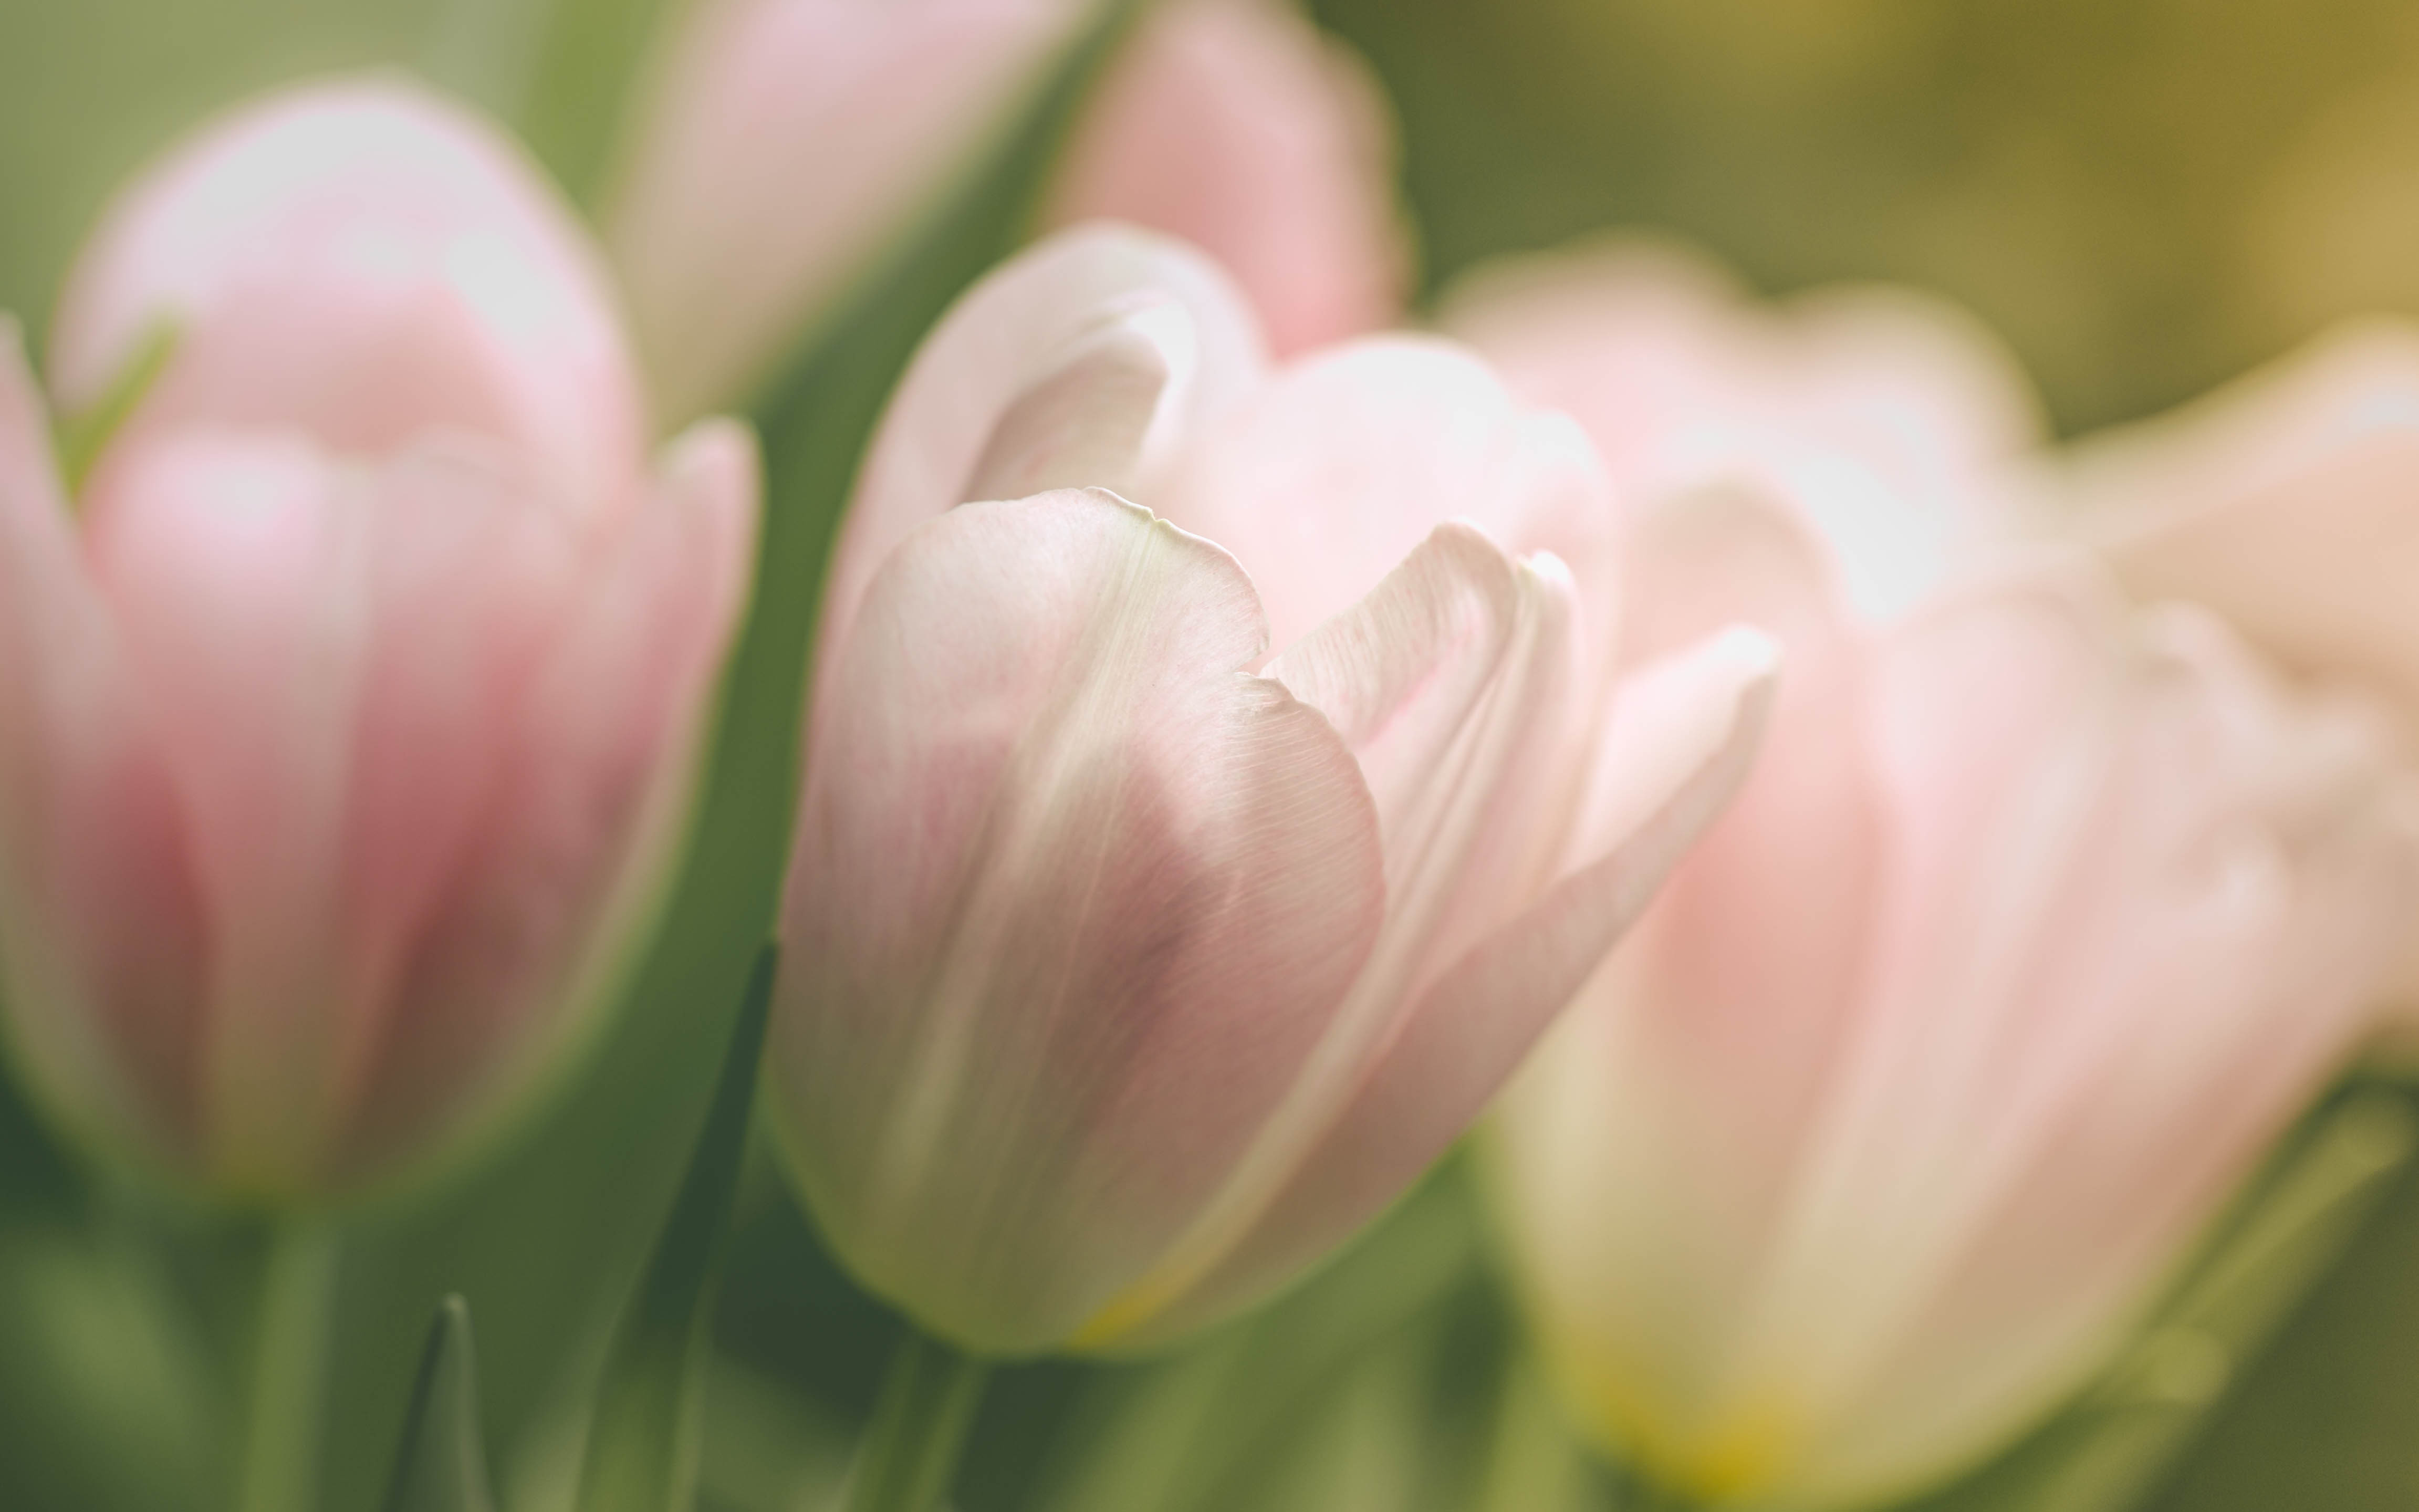 _MG_3641Gentle tulips.jpg undefined by WPC-187